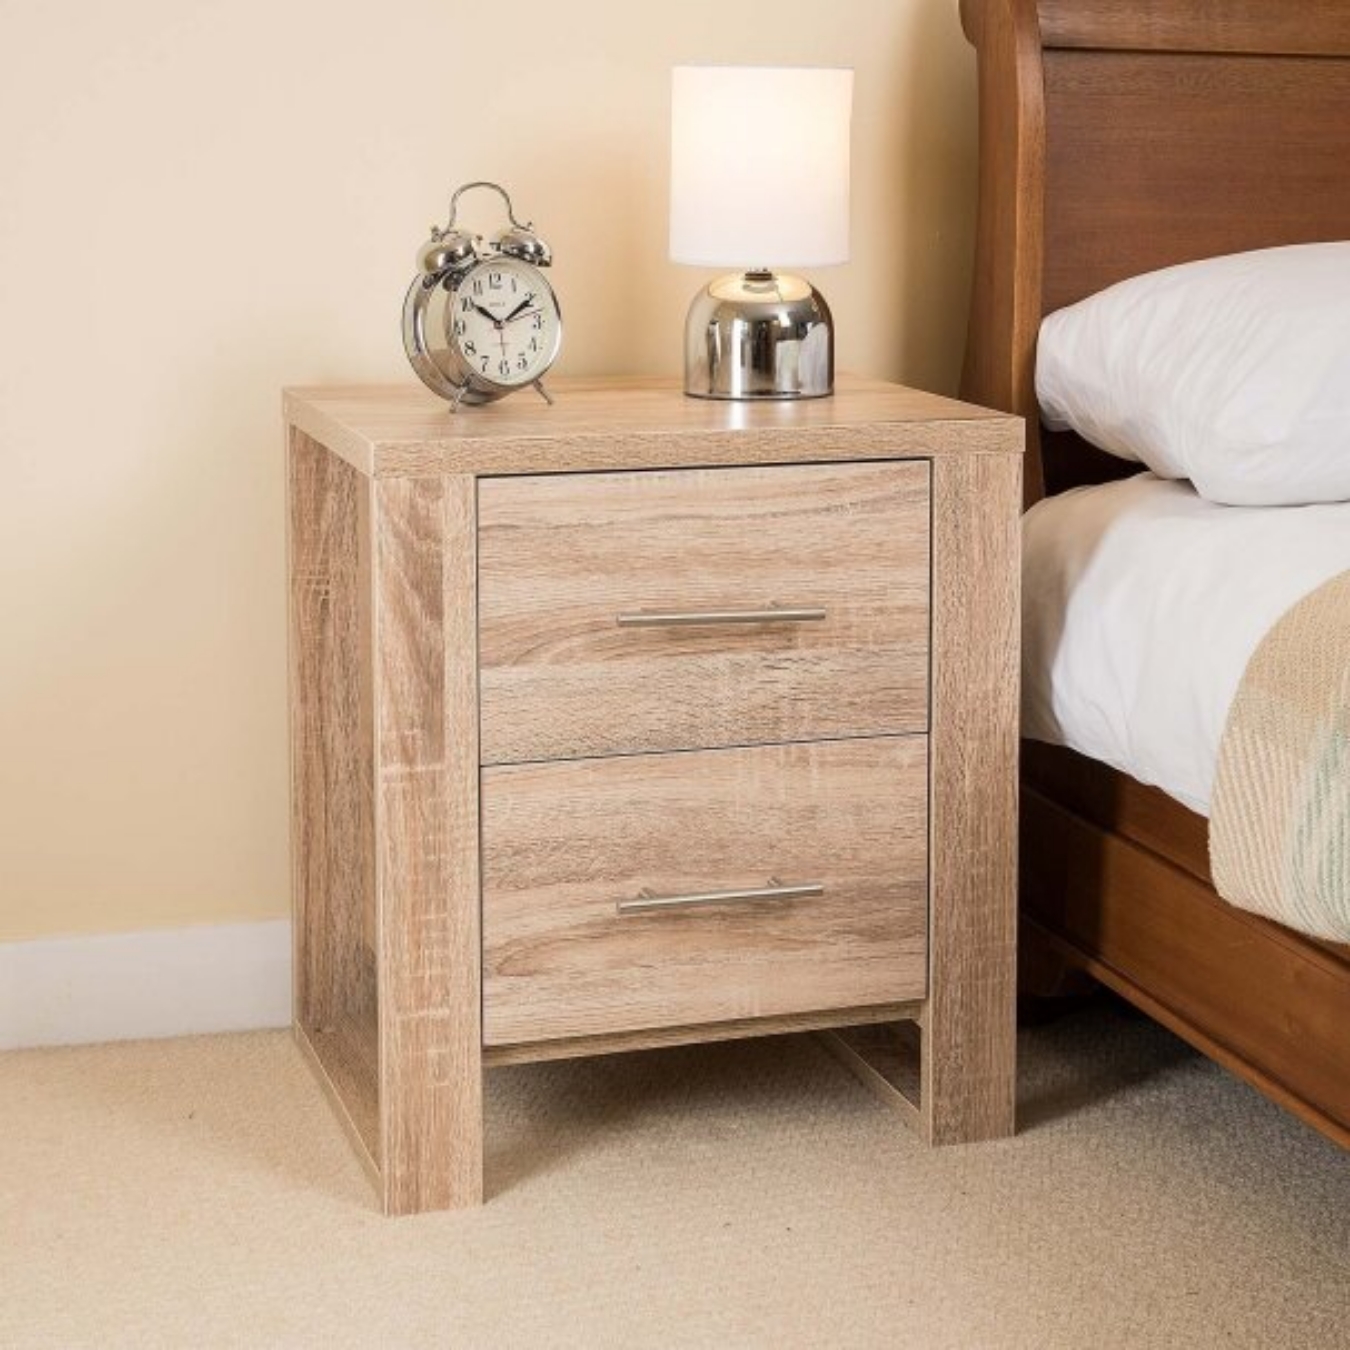 Sleek design, 2 Drawers to store goods separately, built to last Unique design is with Jolene Bedside Table